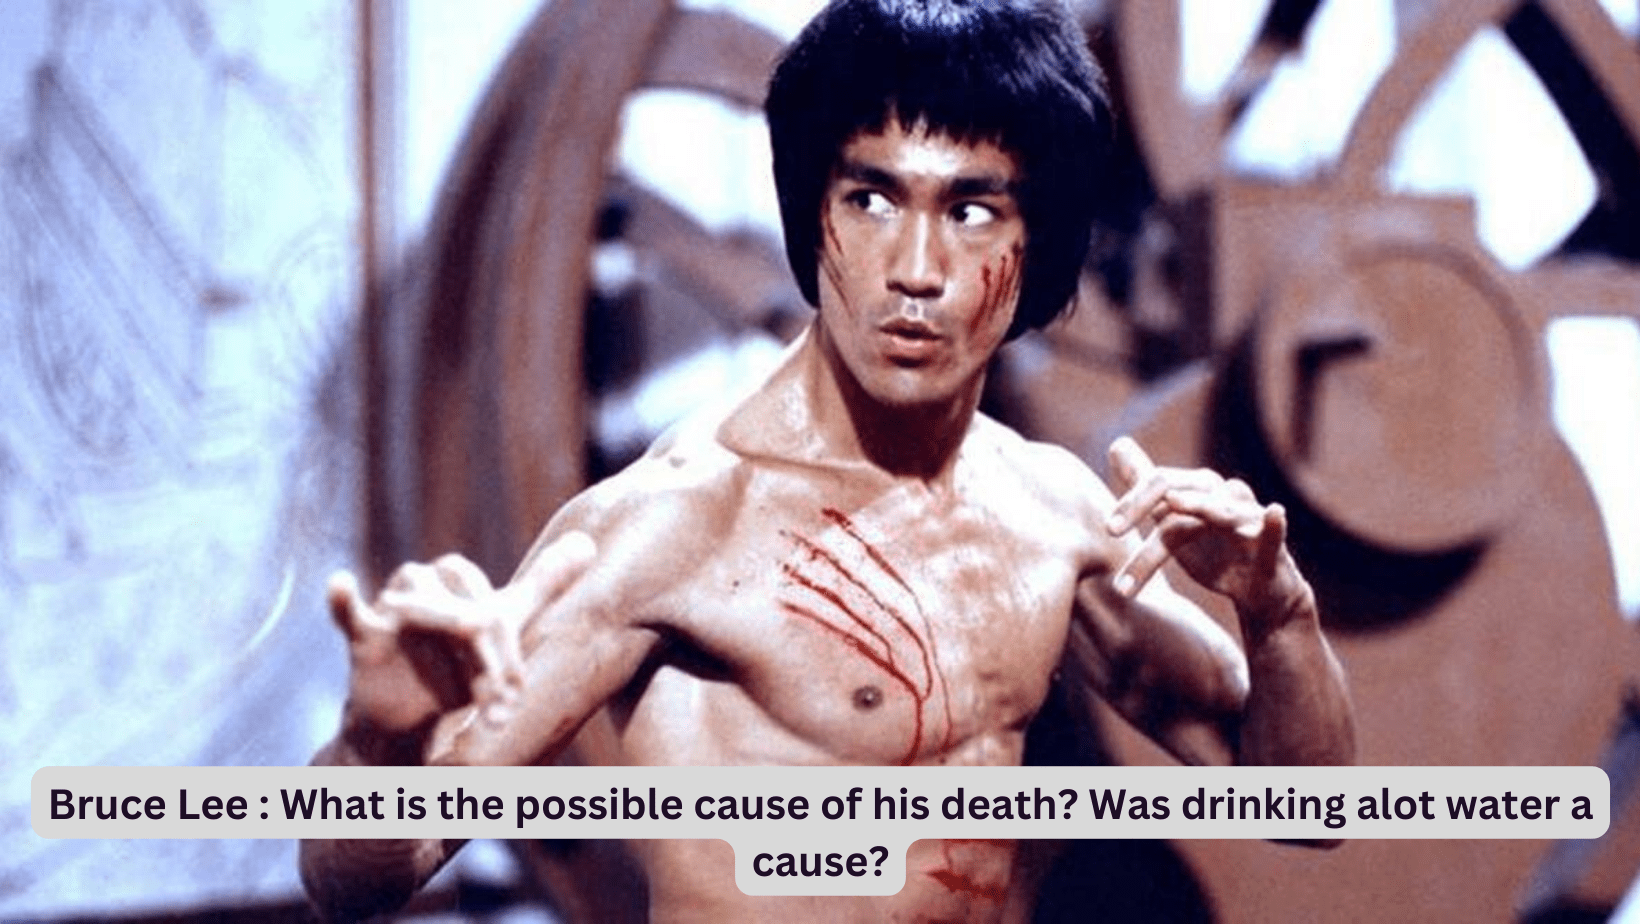 Bruce Lee : What is the possible cause of his death? Was drinking alot water a cause?